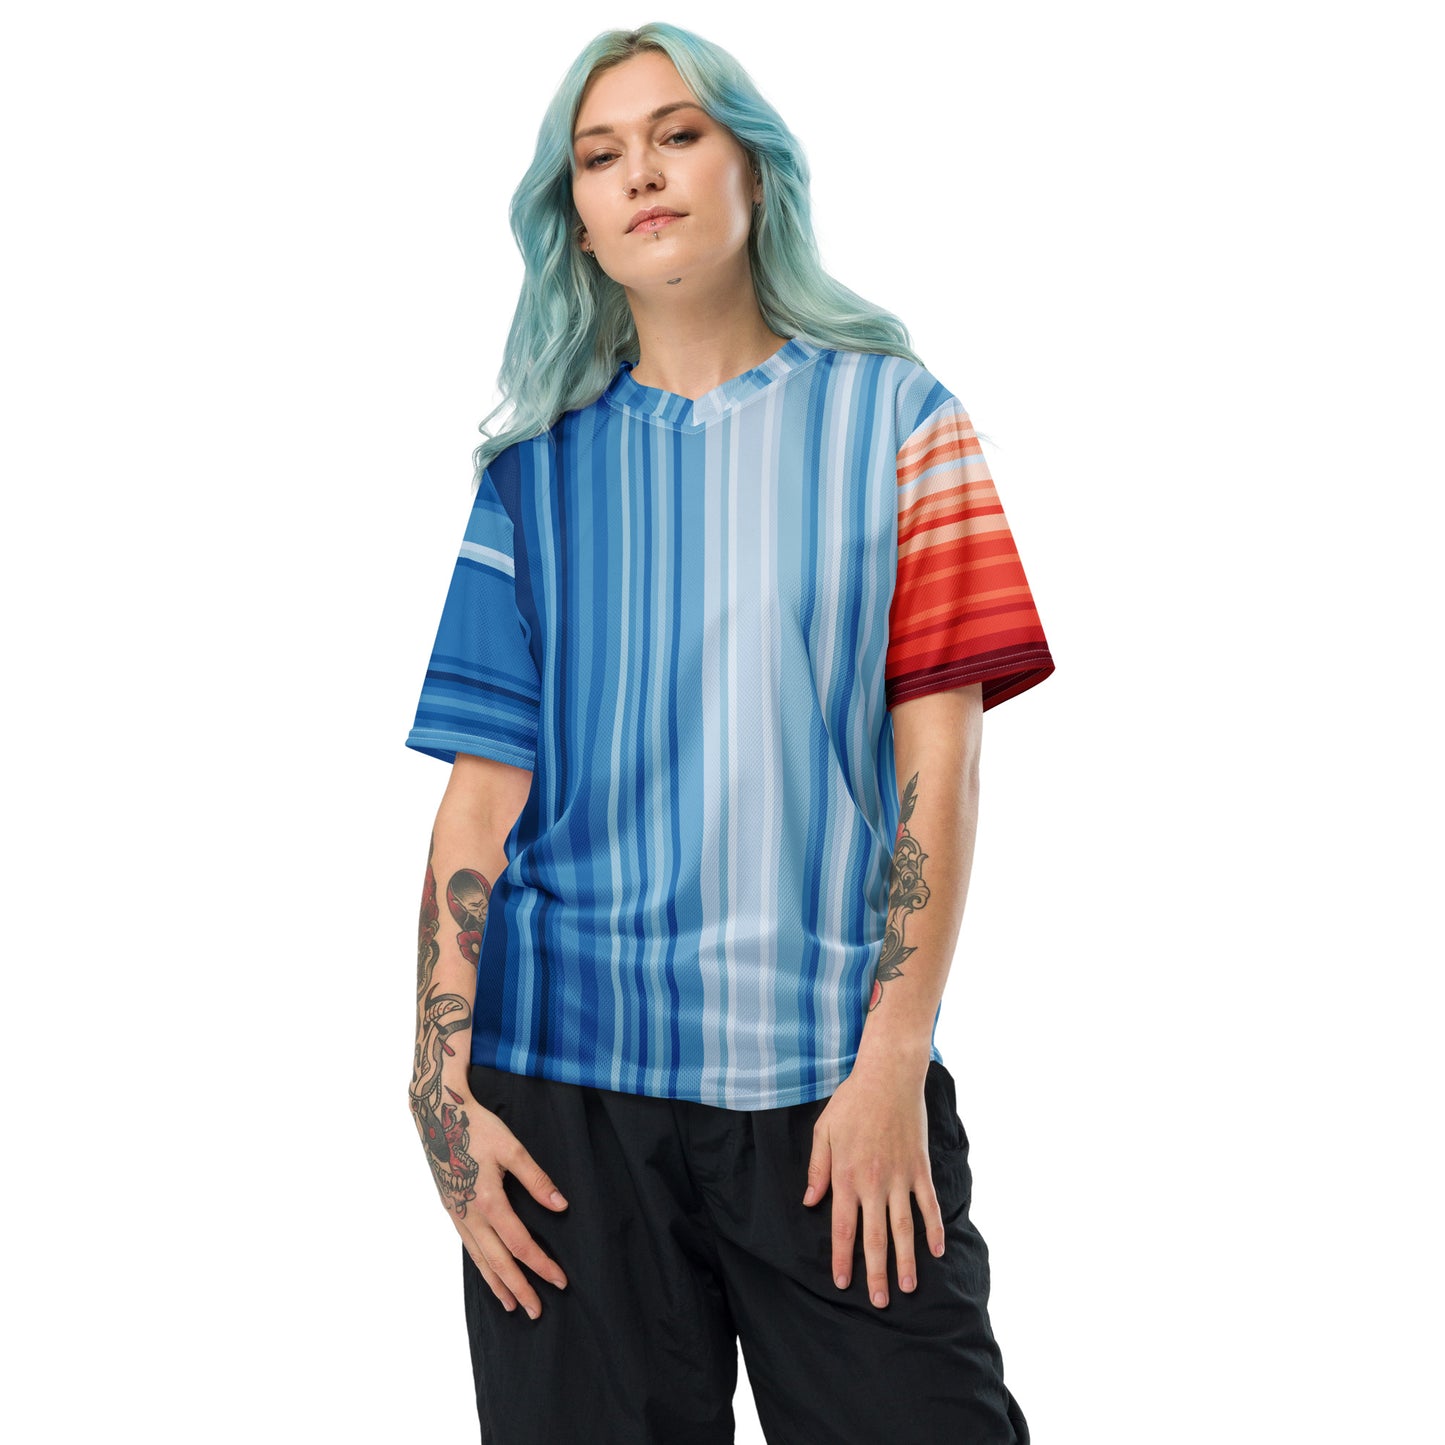 Warming Stripes | Recycled Unisex Sports Jersey